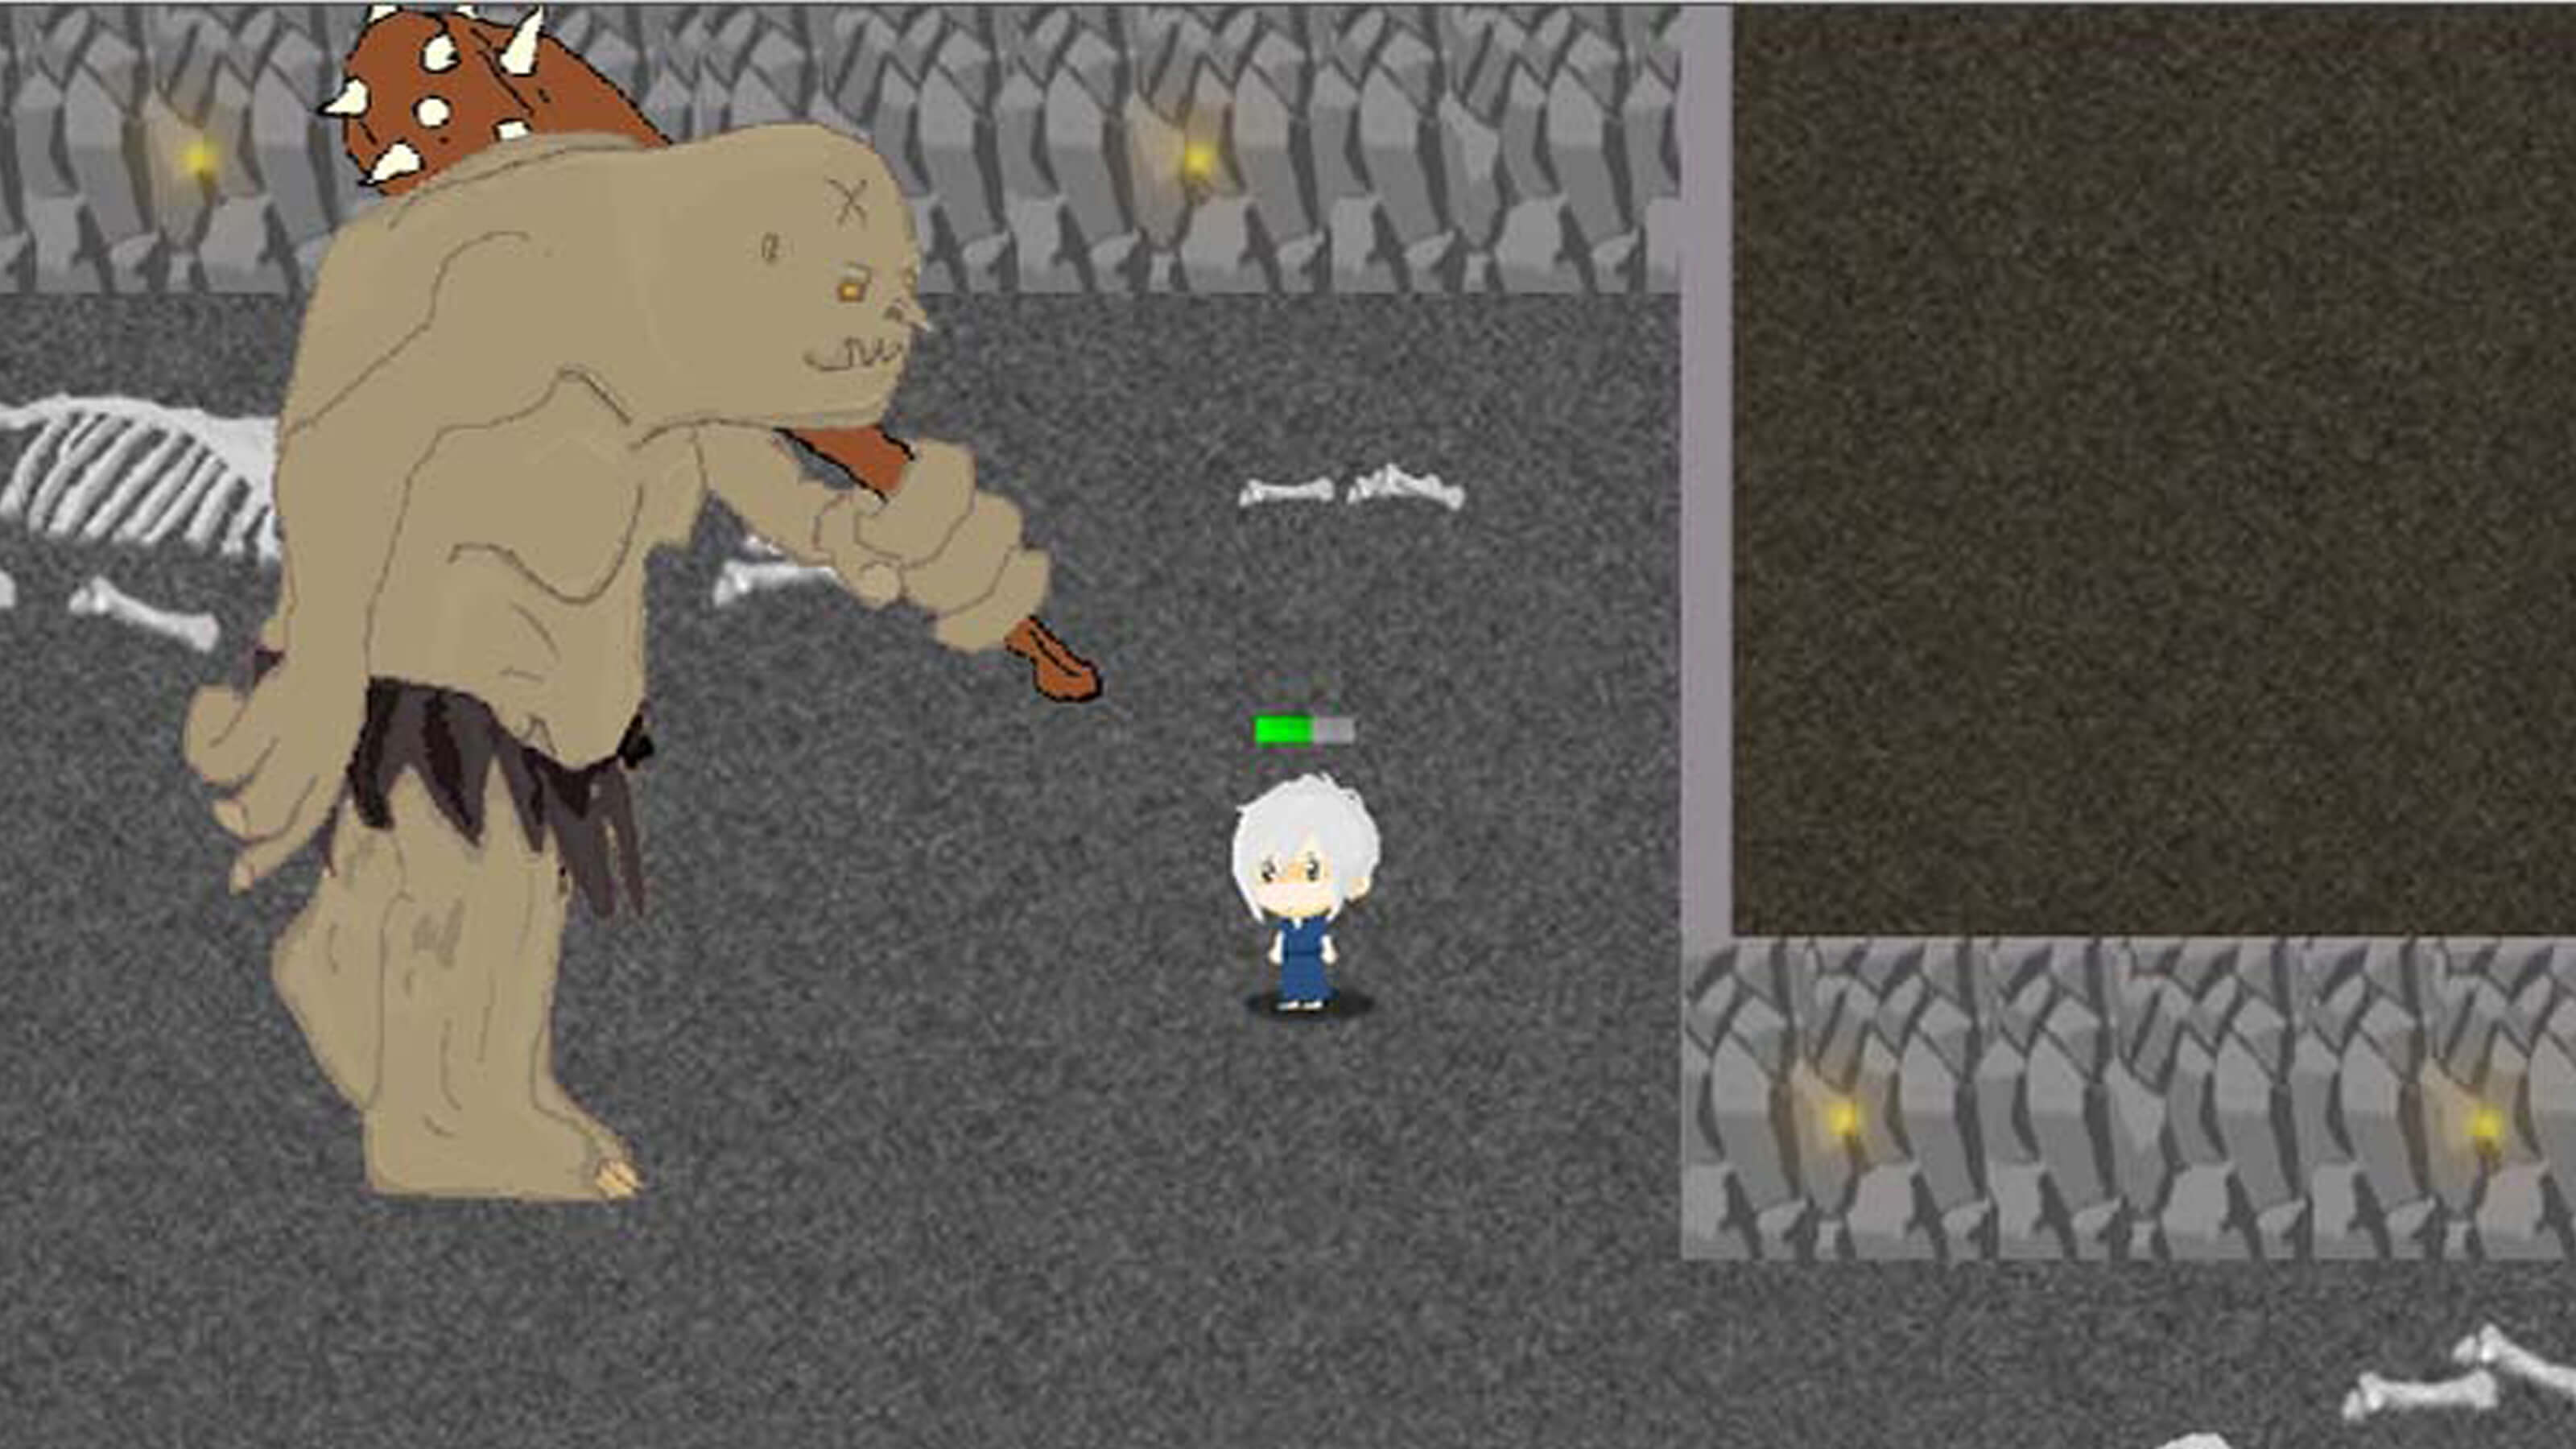 A large brown ogre carrying a spiked club stands next to the player's character in a torch-lit dungeon